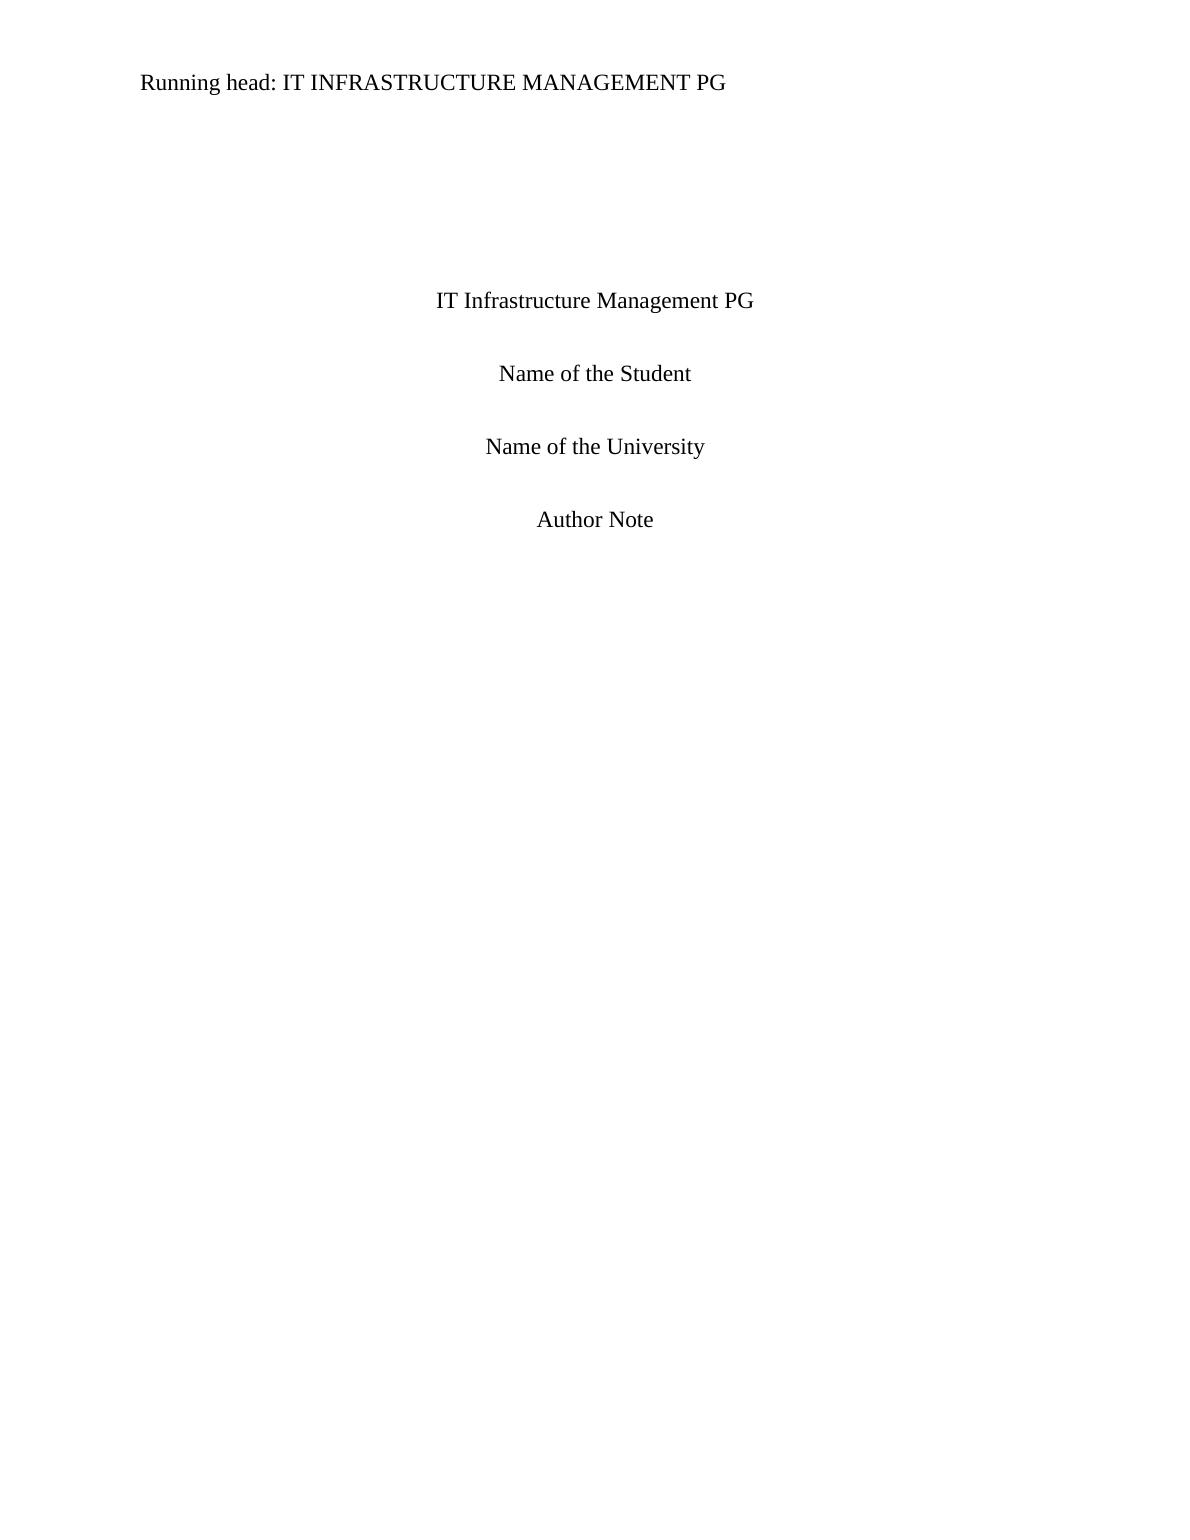 Record Management: A Process of Systemic Creation, Control and Maintenance_1